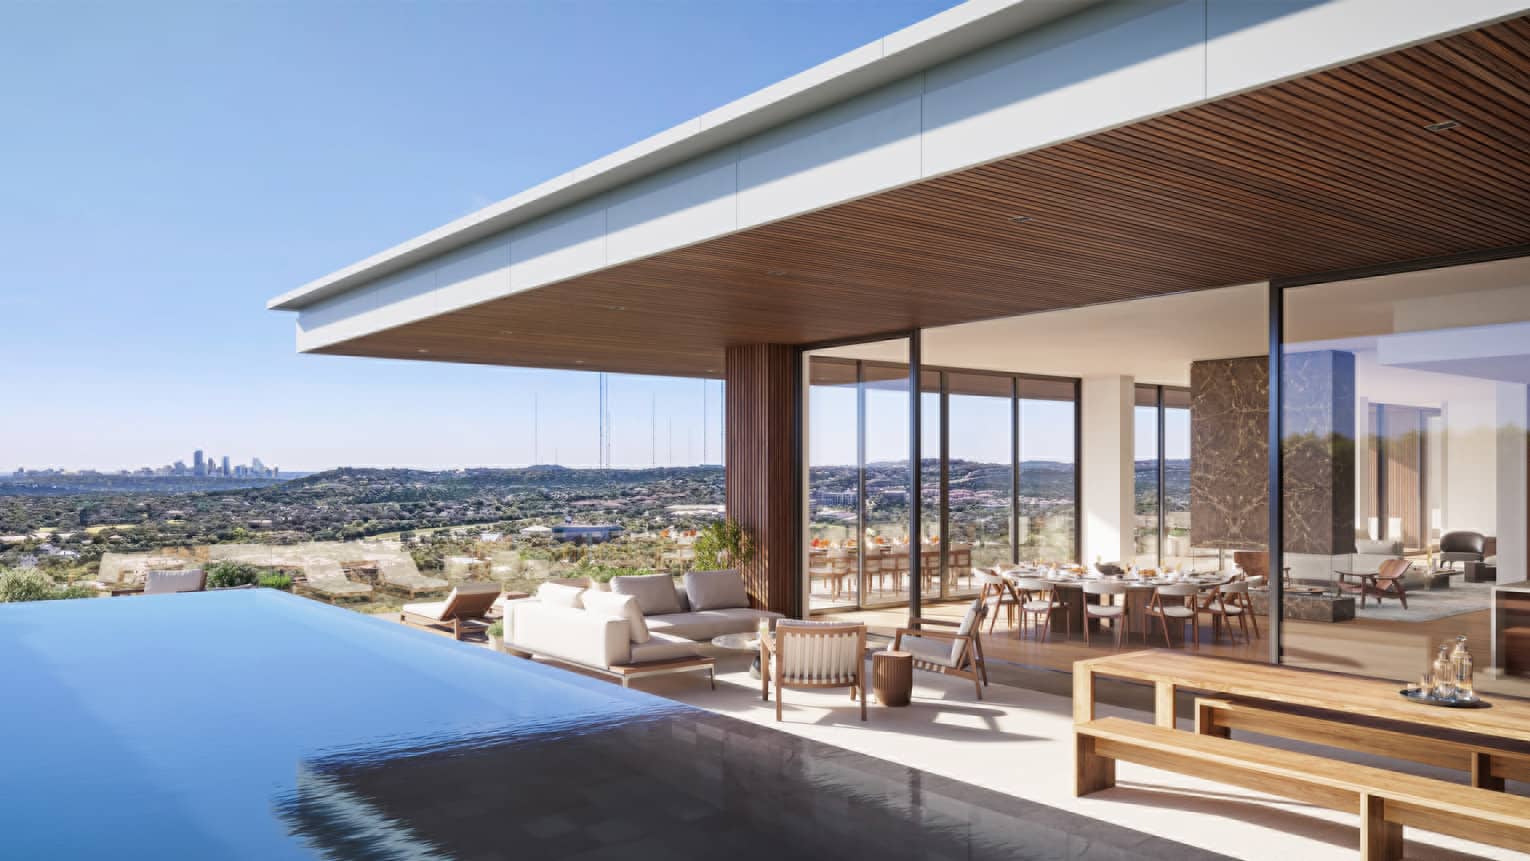 Rendering of residence with infinity pool and skyline in background